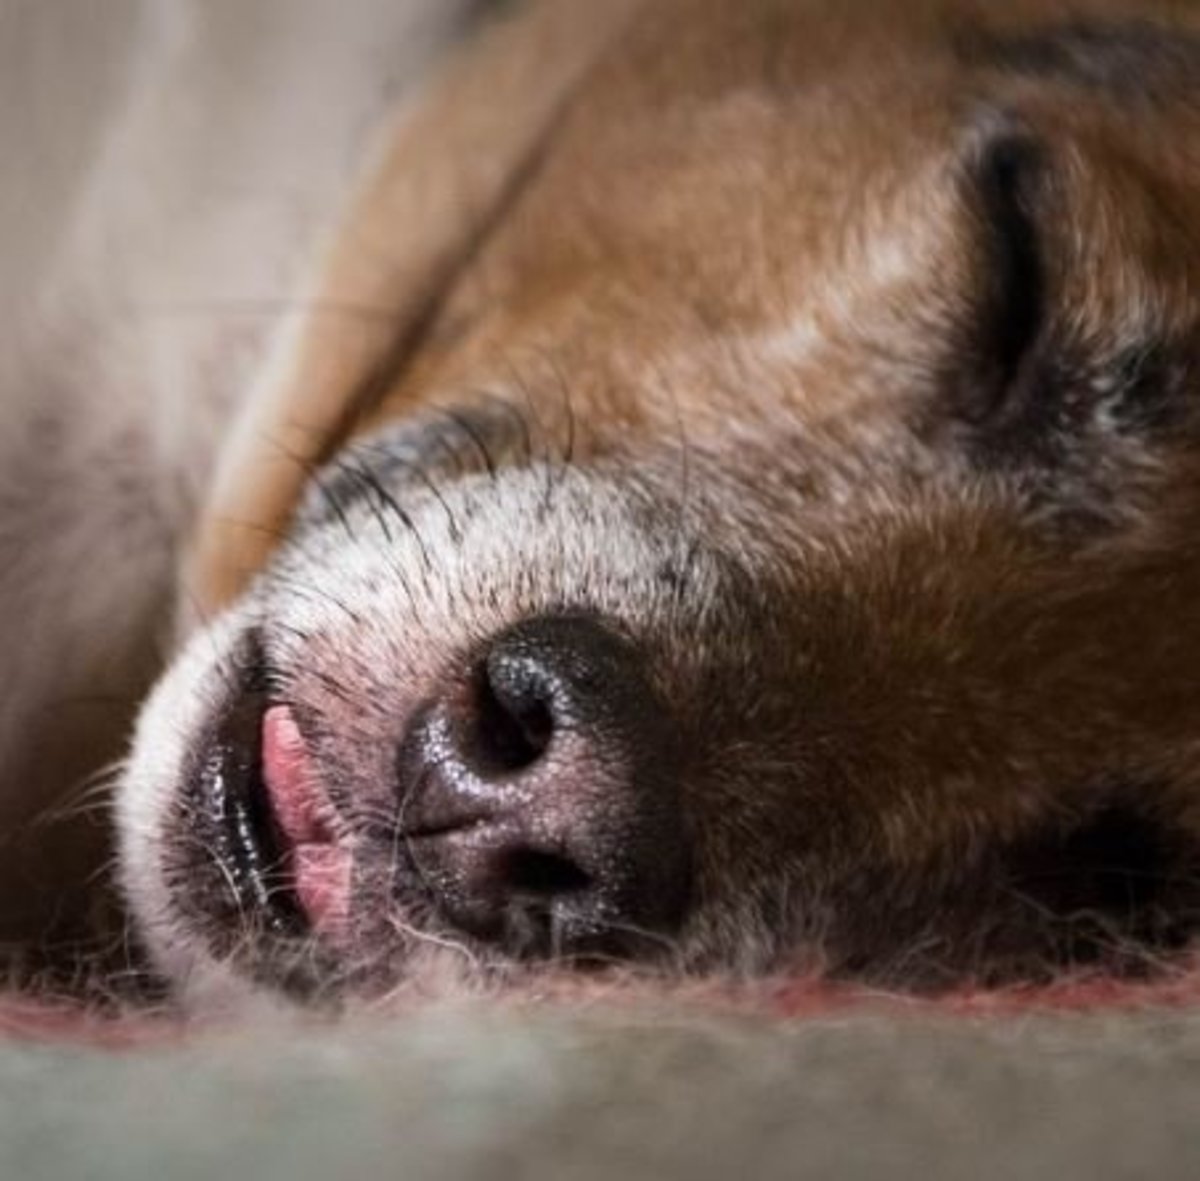 Fortunately, there are ways to reduce dog snoring.